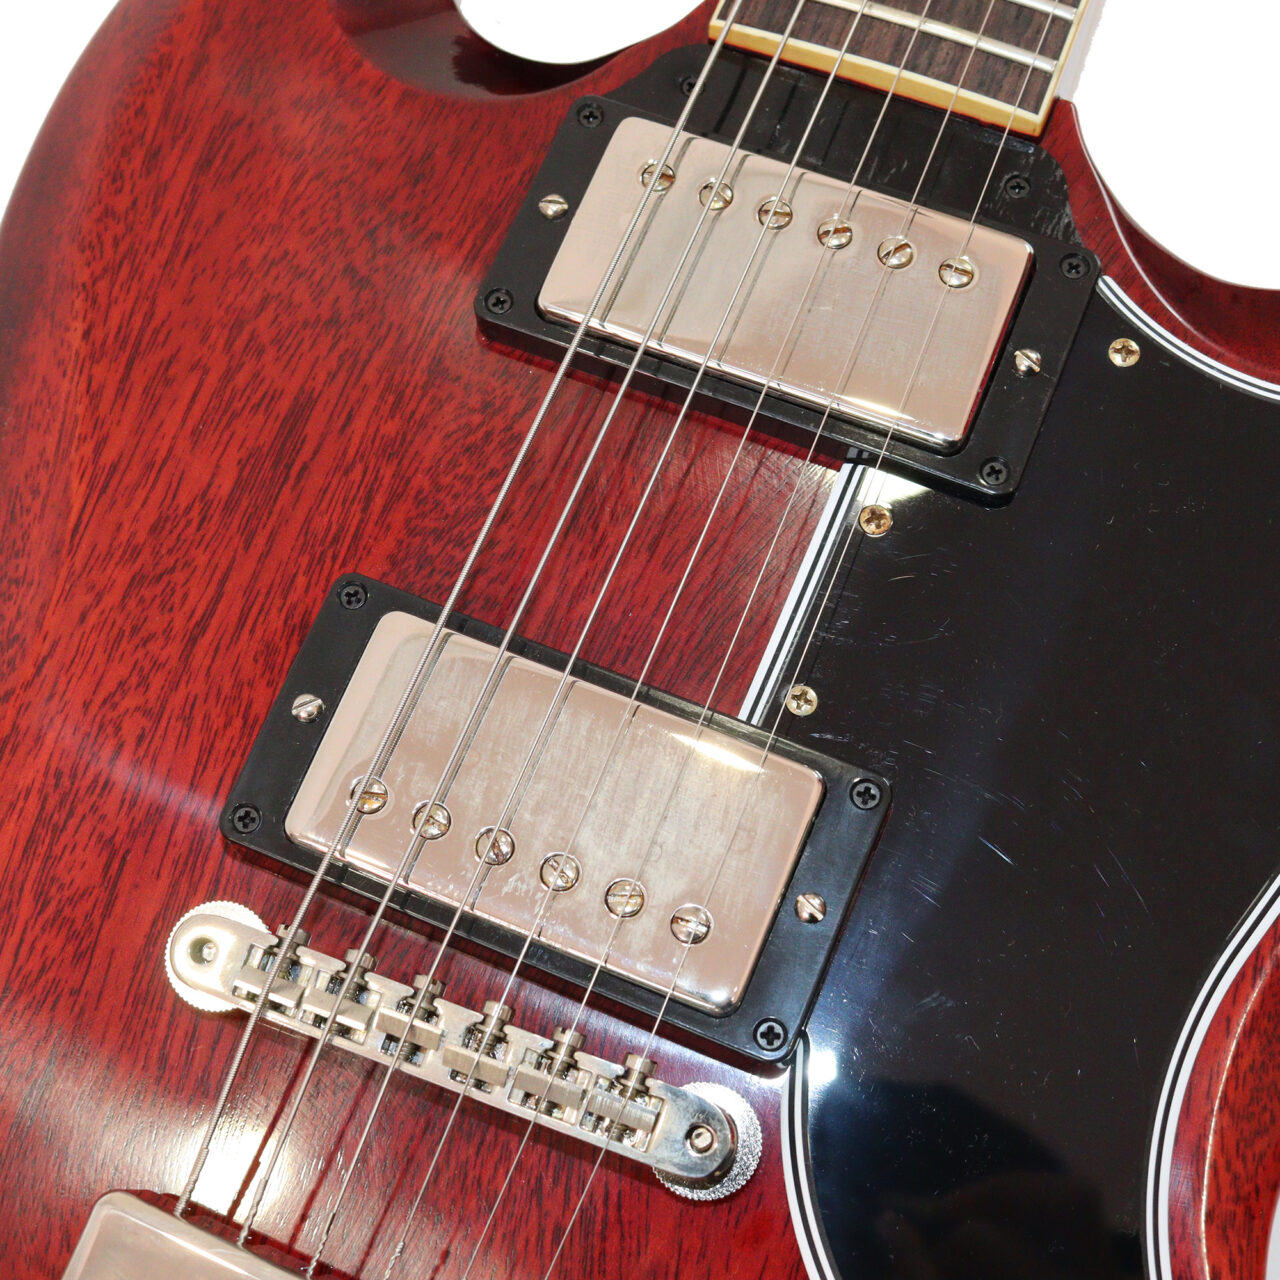 Gibson Custom Shop 60th Anniversary 1961 Les Paul SG Standard With Sideways Vibrola Cherry Red VOS